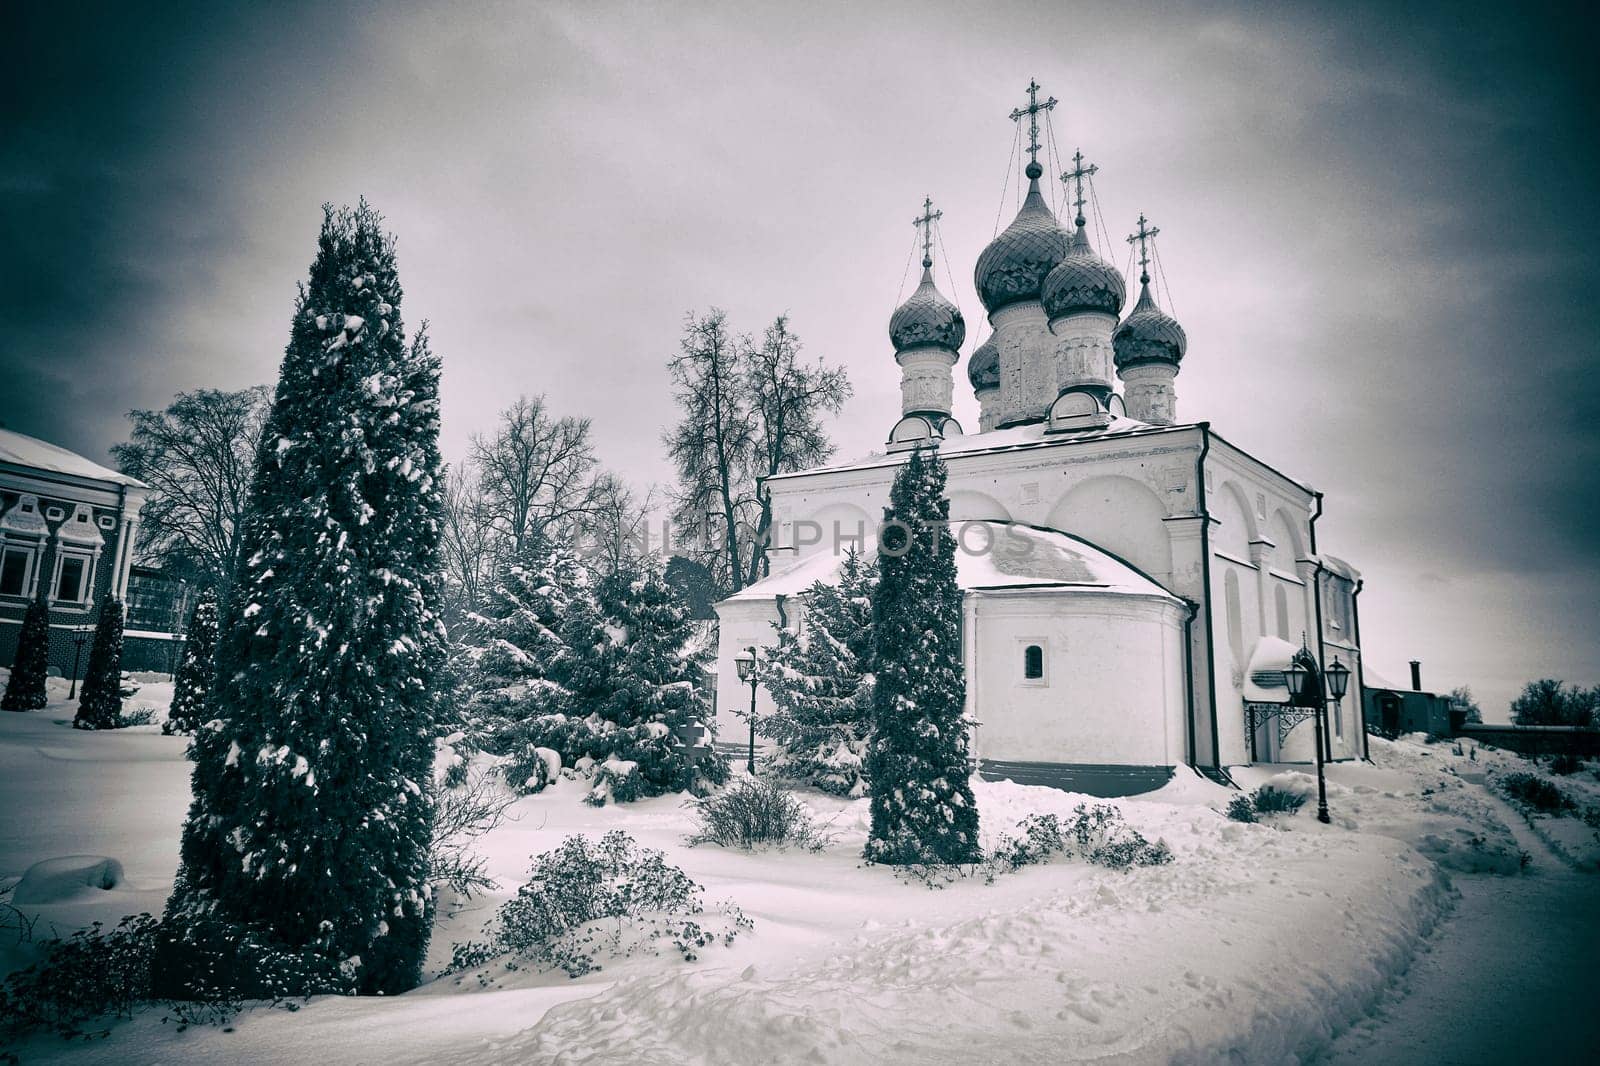 Winter Park and Russian Orthodox Church. Vintage film camera effect added by DAndreev